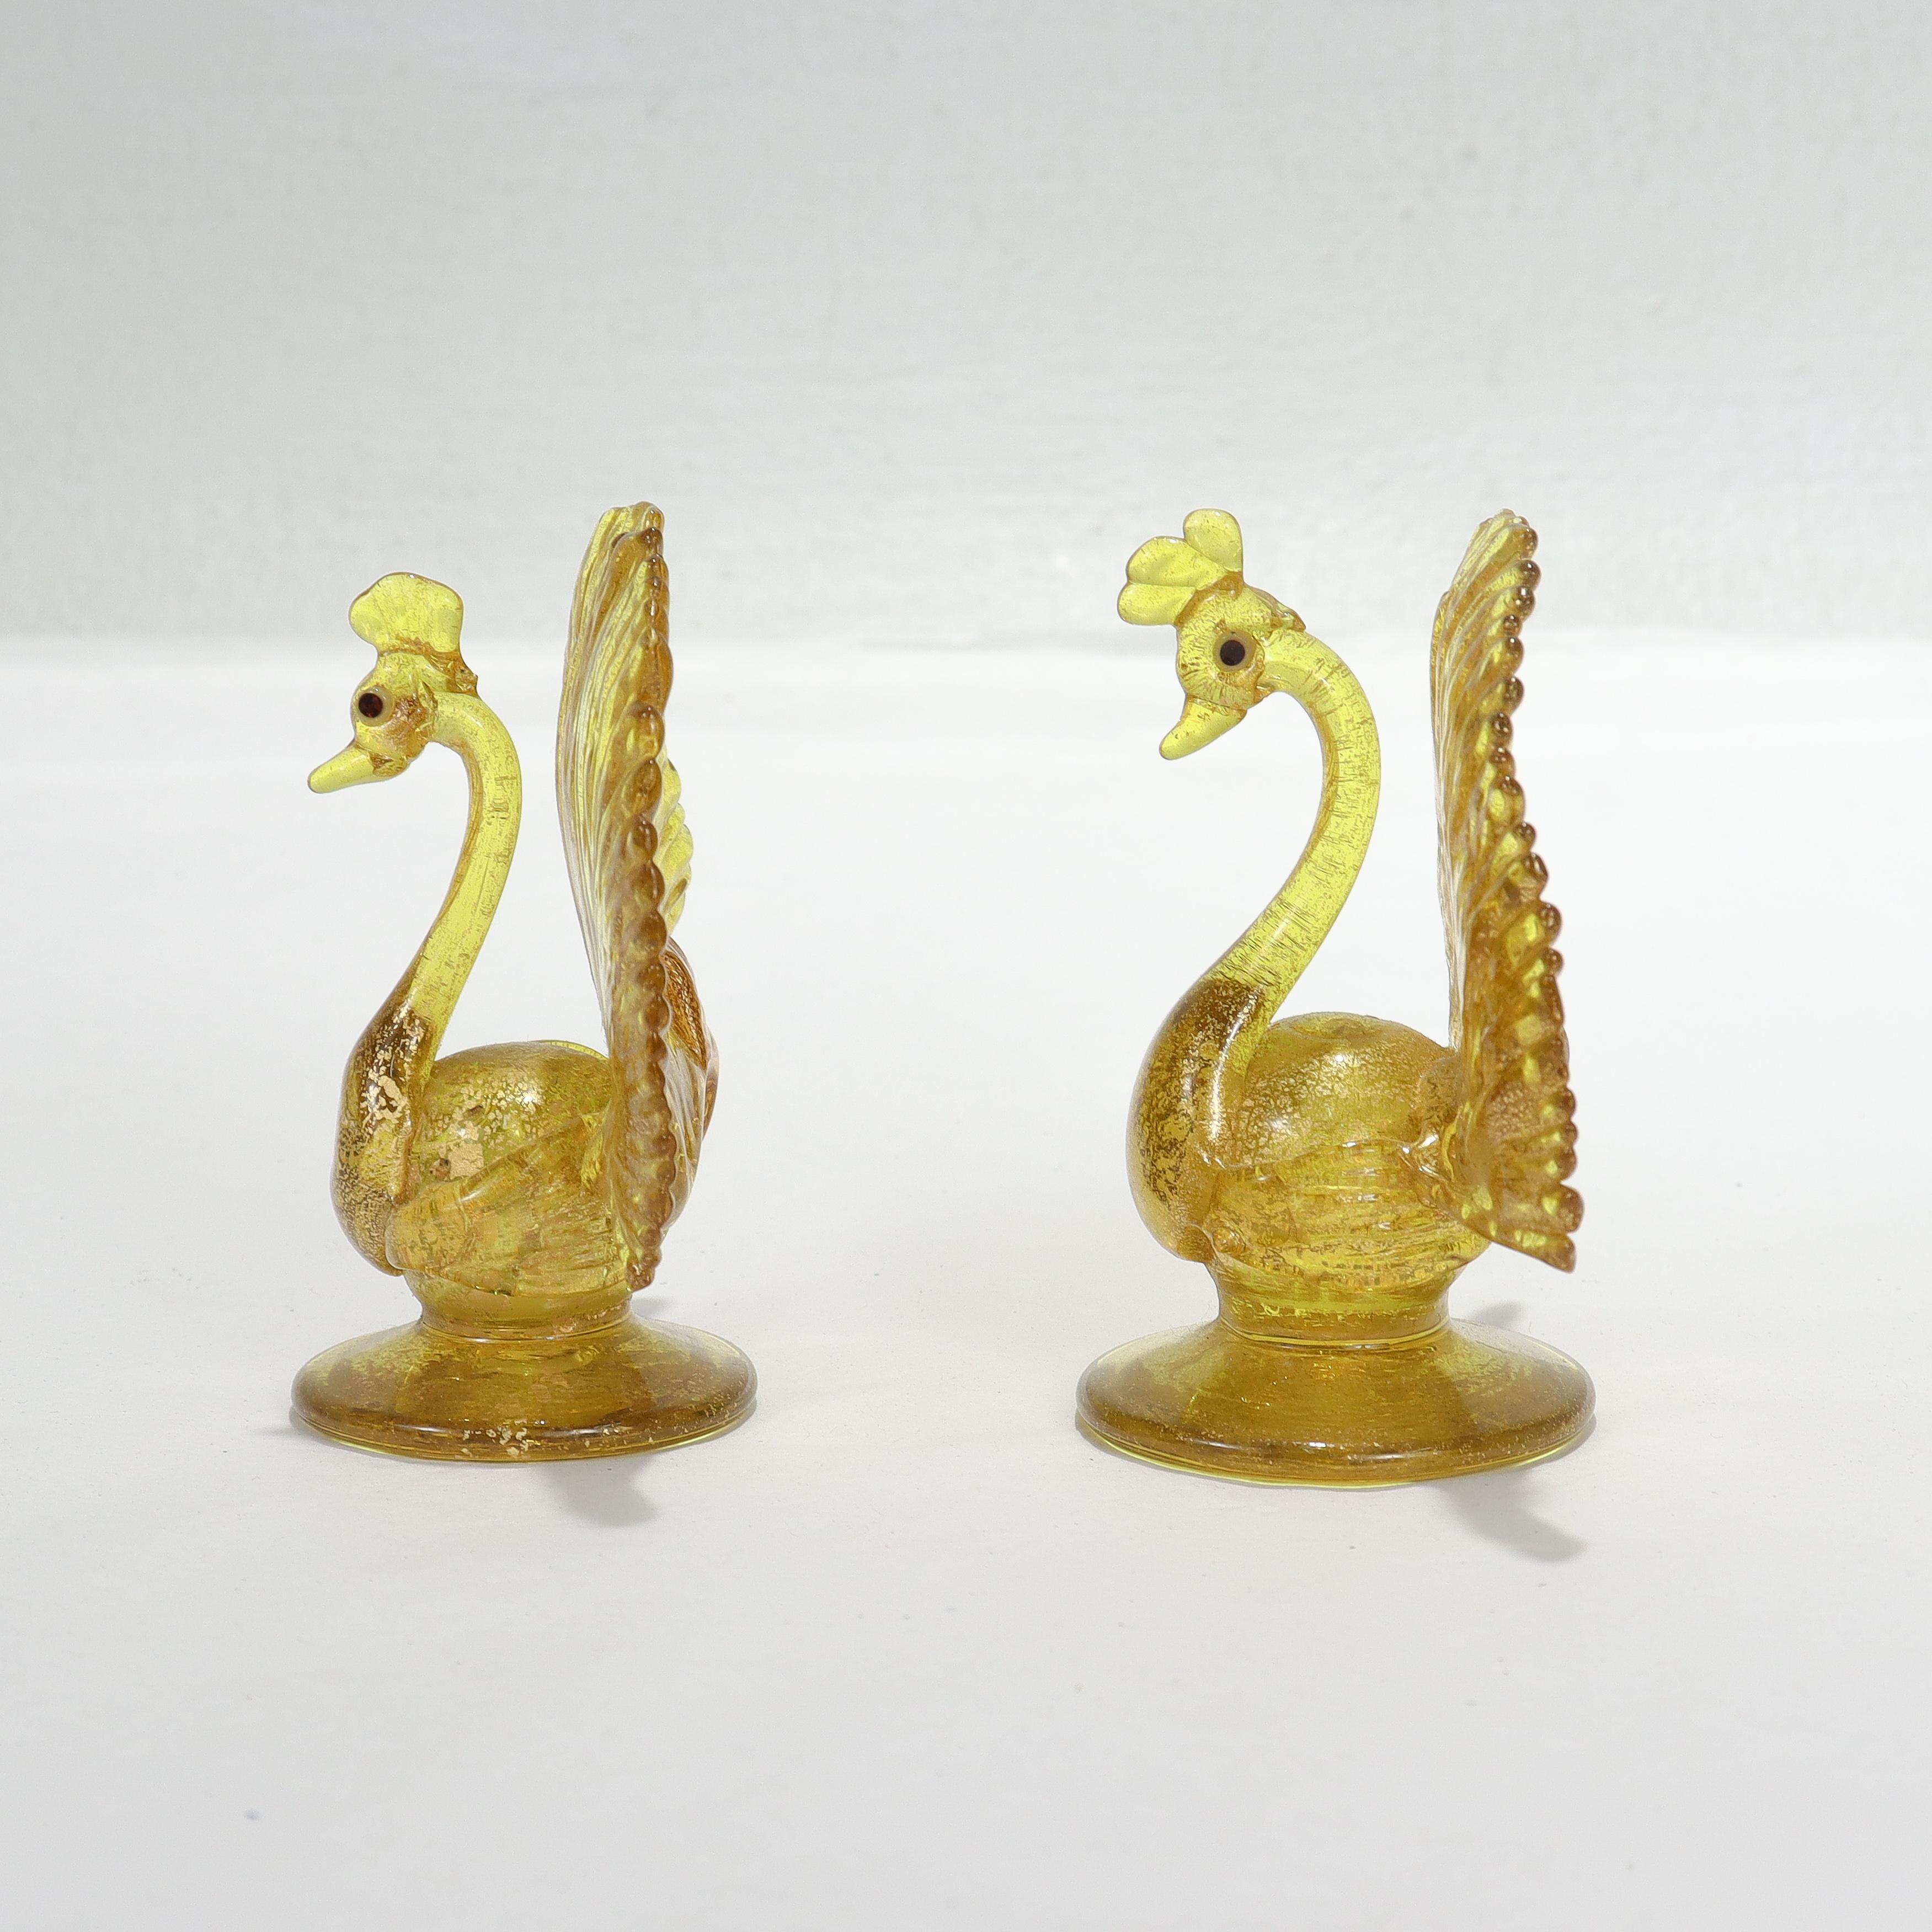 20th Century Pair Salviati Attributed Venetian/Murano Glass Peacock Place Card Holder Figures For Sale